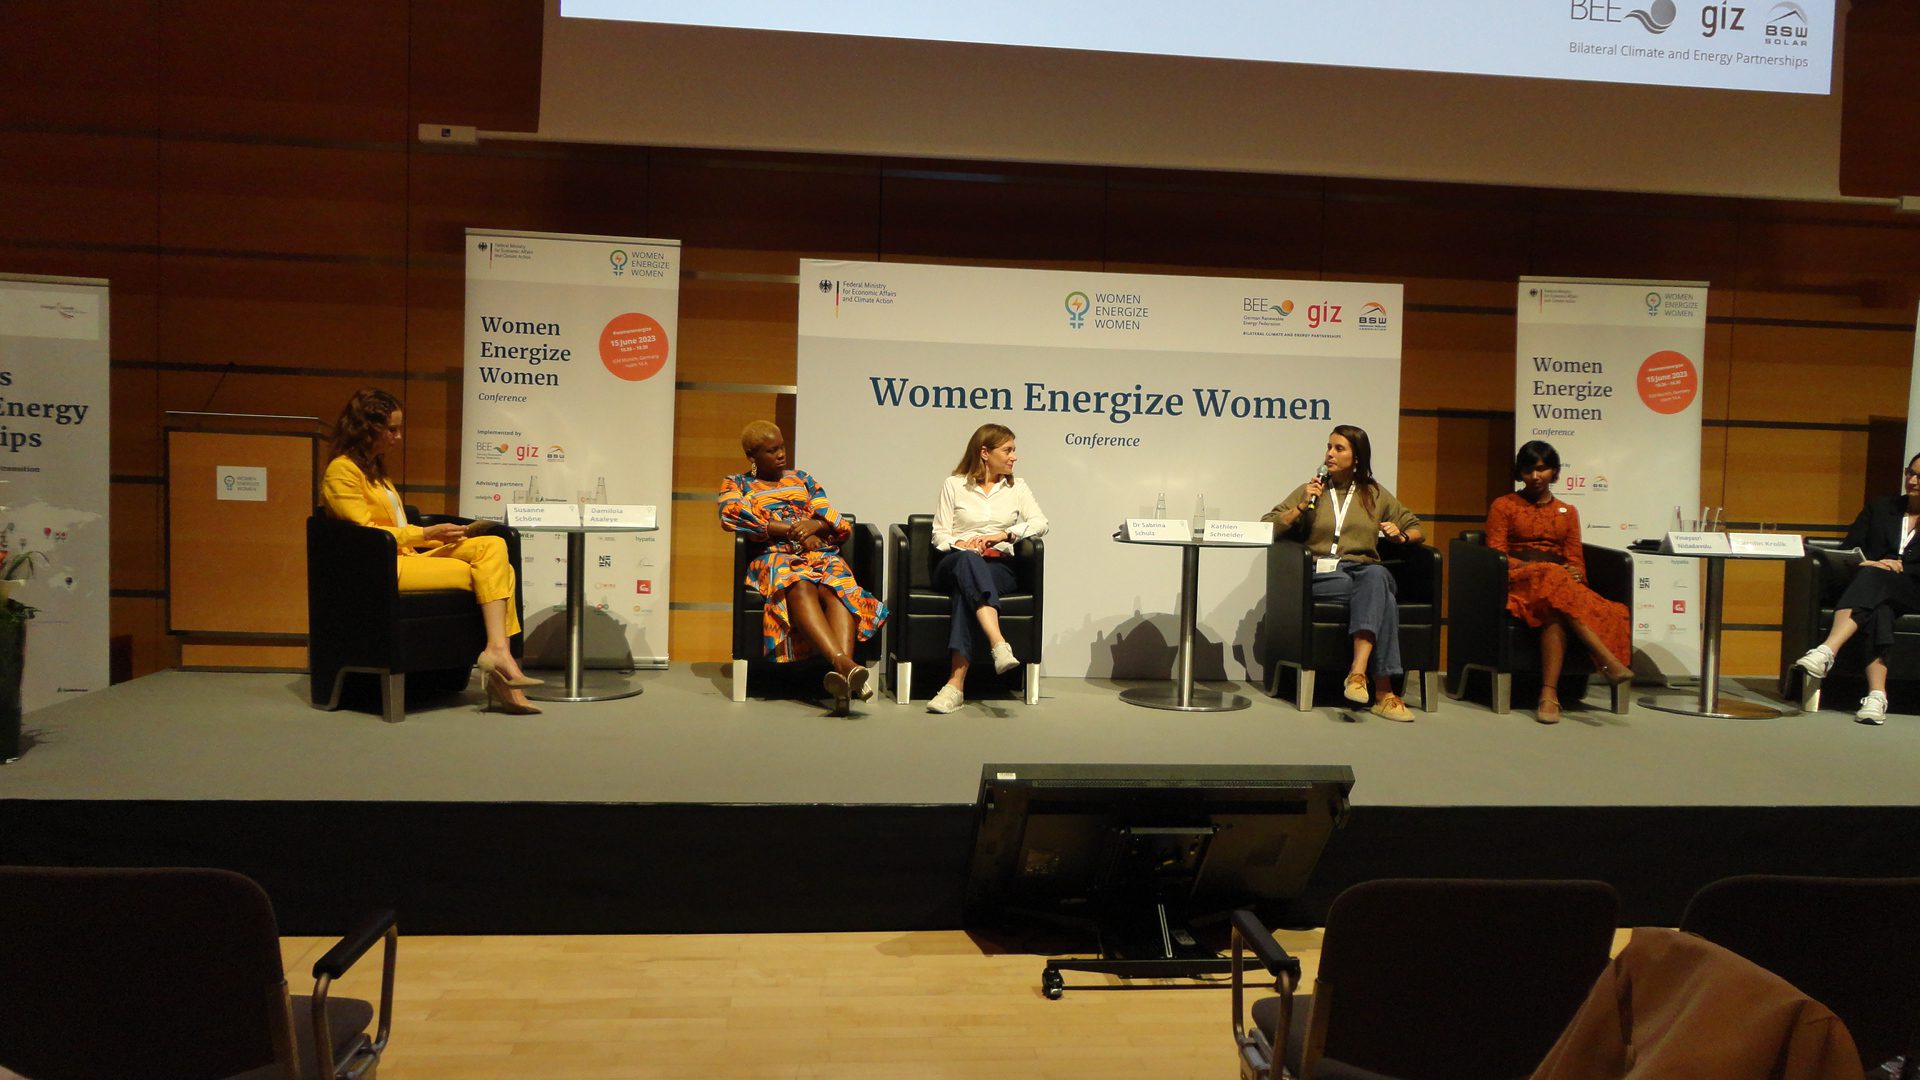 Women panelists on stage at a conference